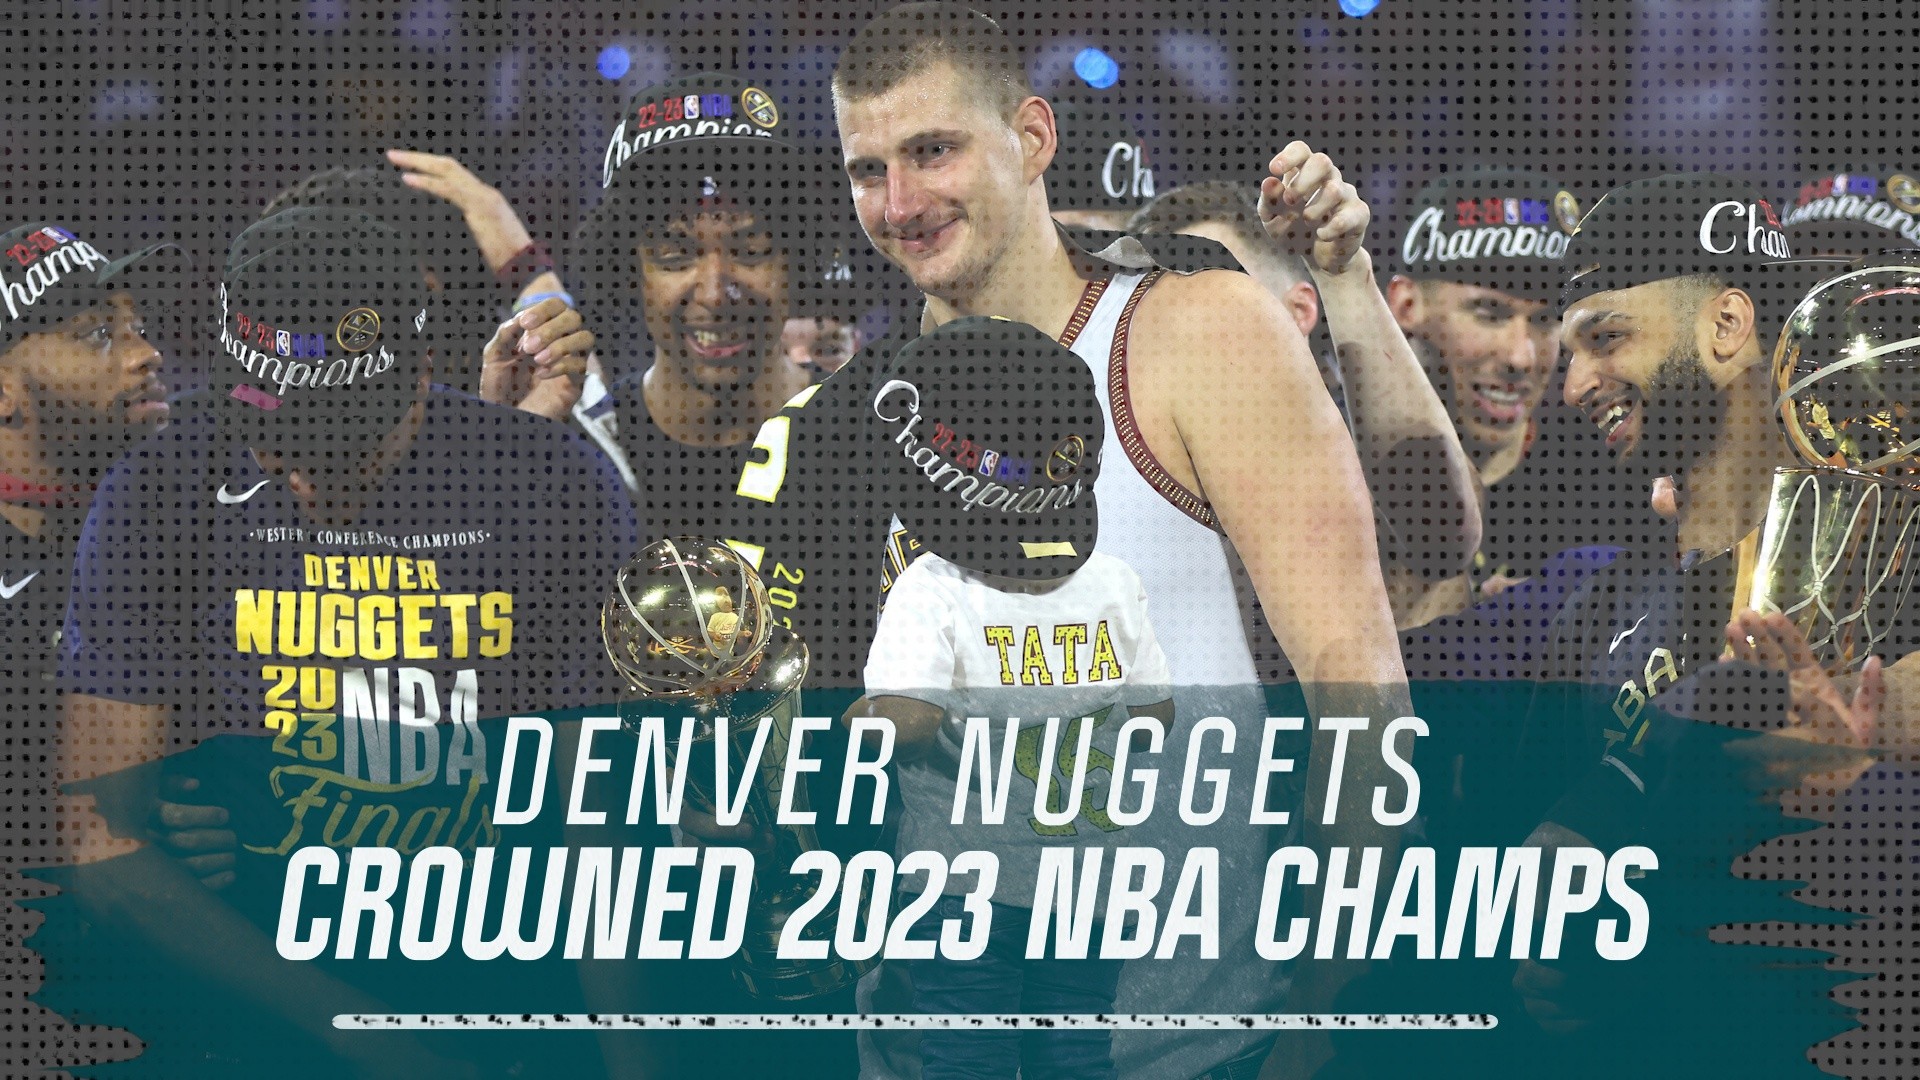 Denver Nuggets Are Your NBA Champs. When And Where Is The Parade?